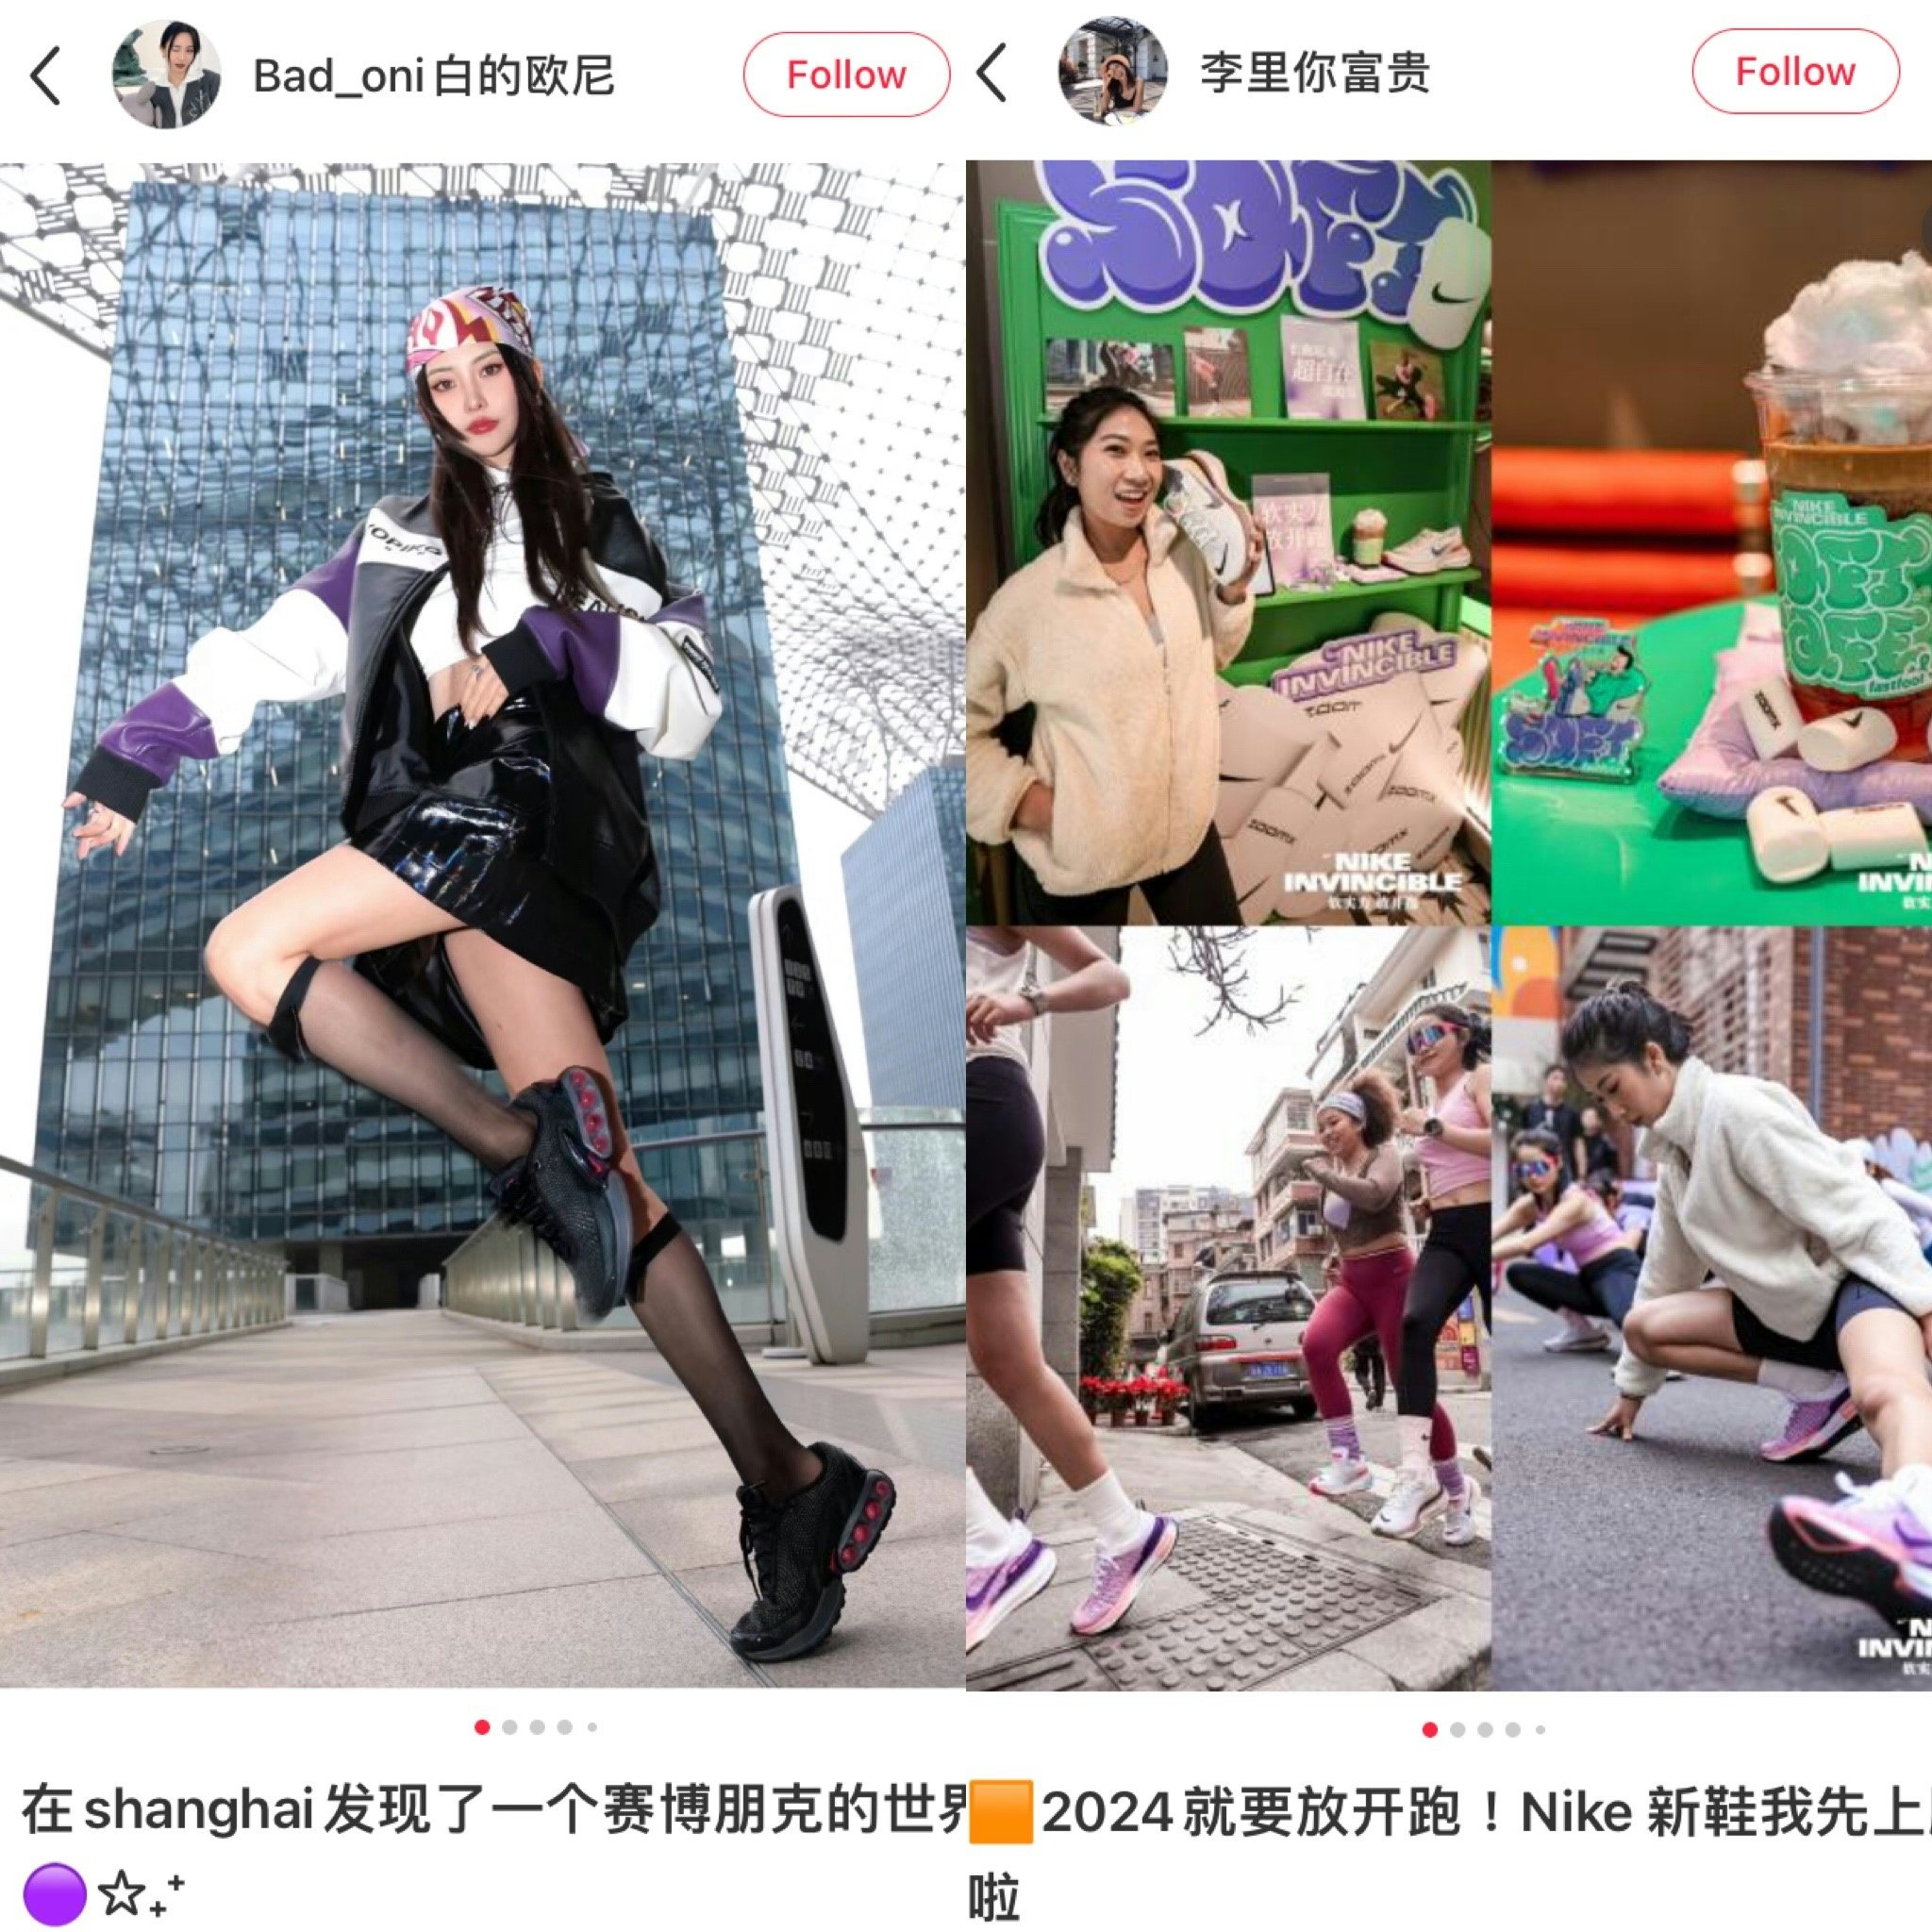 Gen Z consumers post about their experiences with Nike. Image: Xiaohongshu